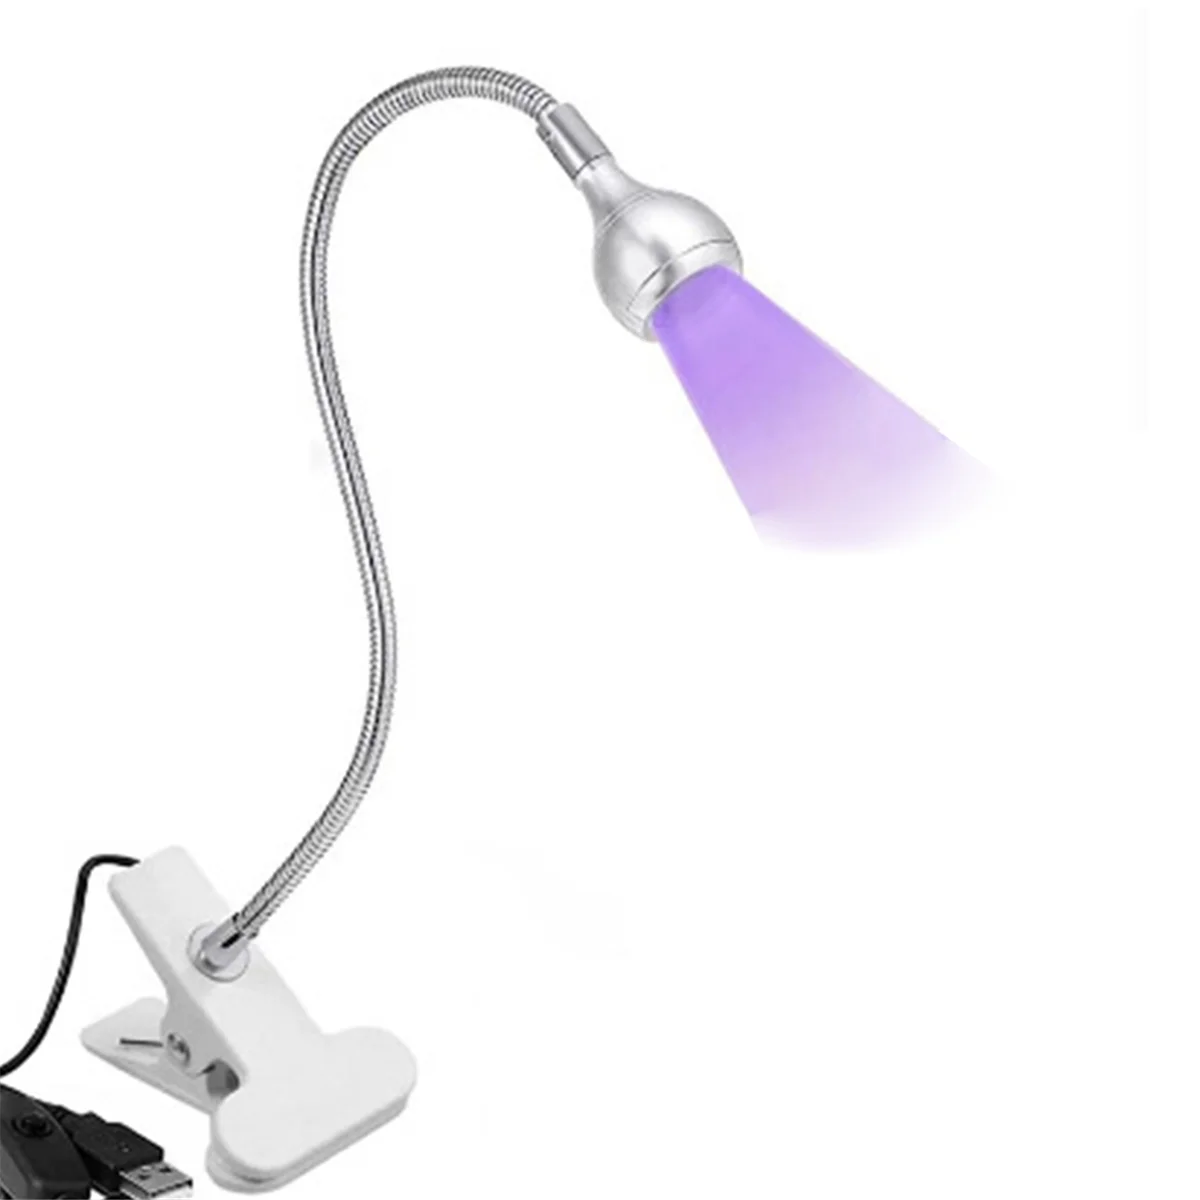 

UV LED Nail Lamp - Mini LED Nail Lamp Gel X Lamp for Nails with Securing Clip Rotatable LED Light, Silver